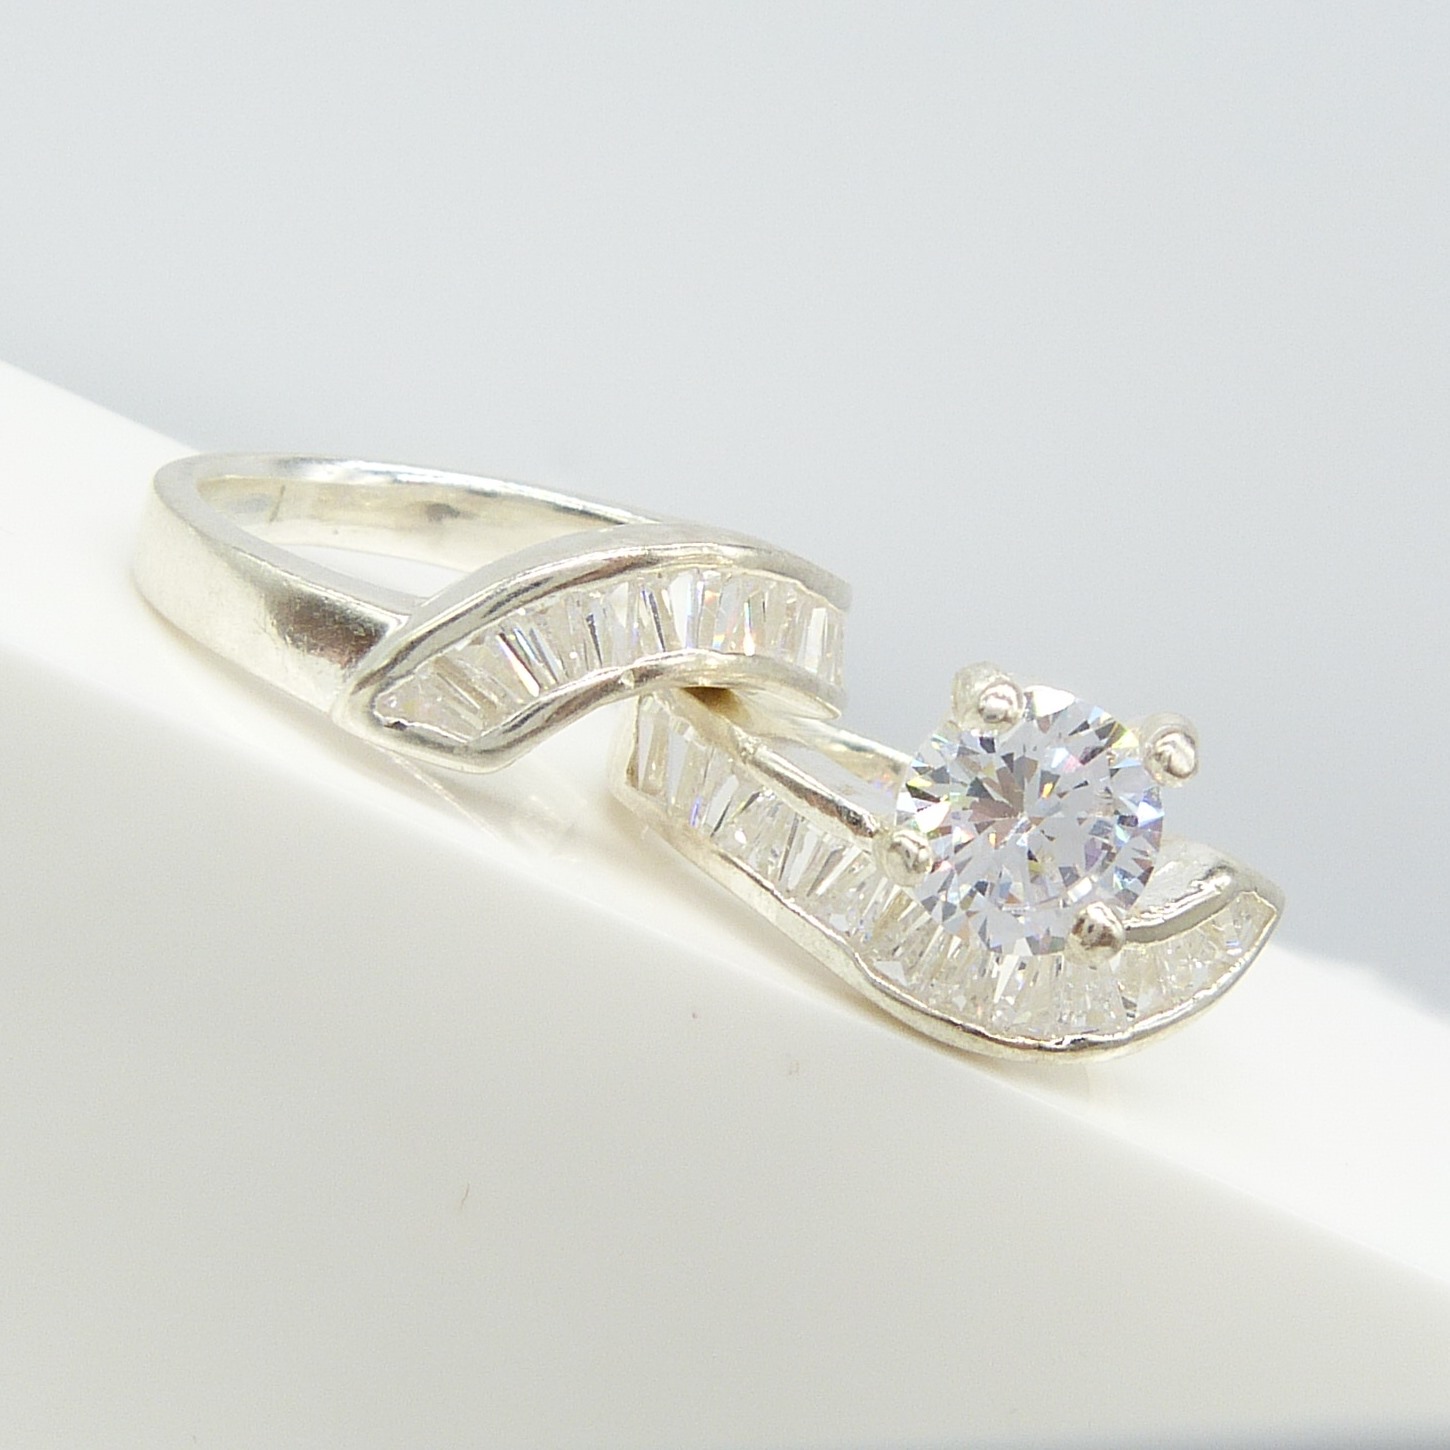 Two part cubic zirconia-set silver wave-style dress ring - Image 6 of 7